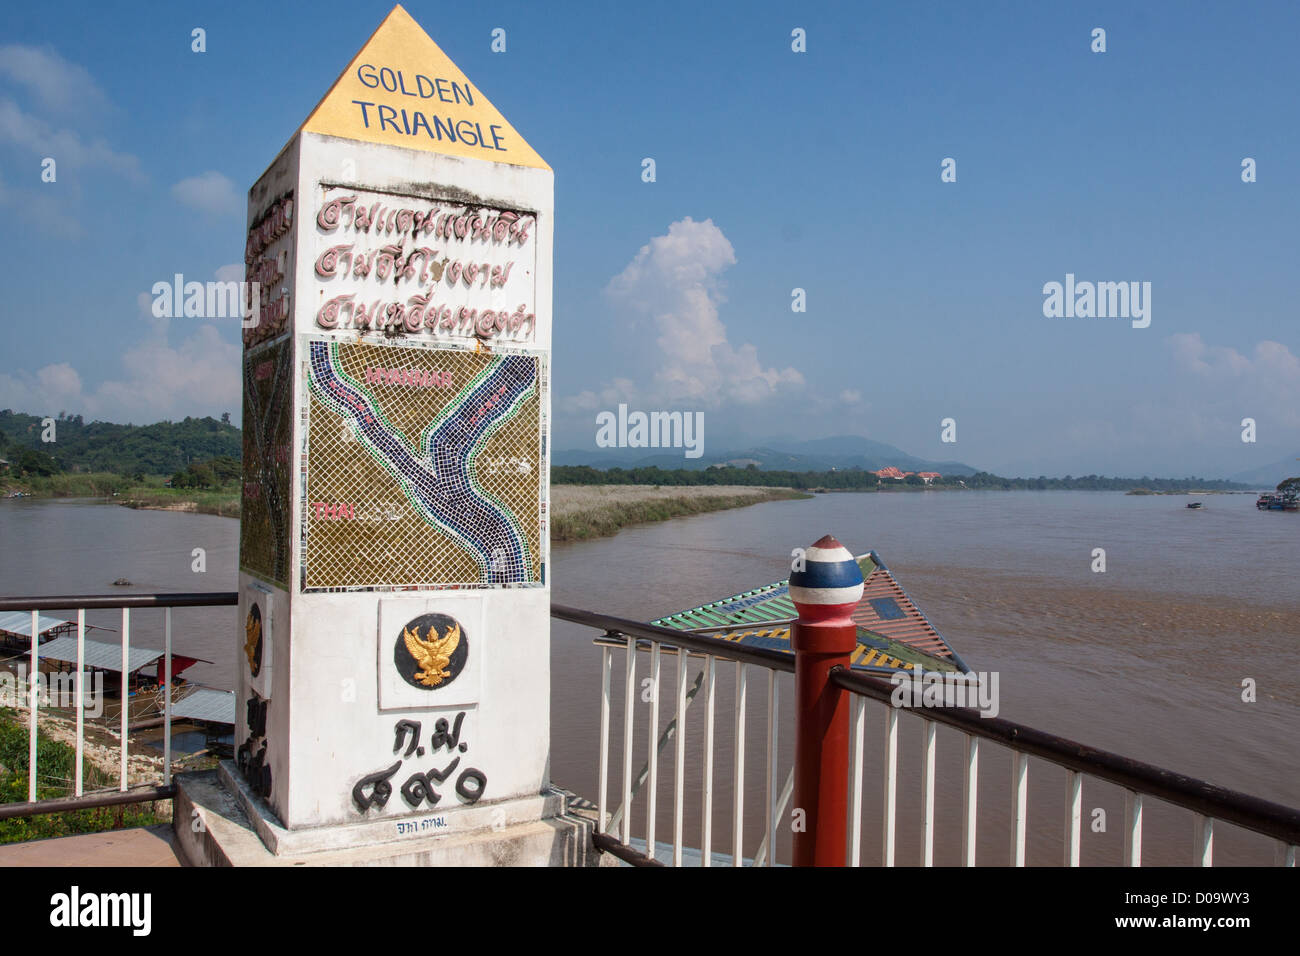 MONUMENT INDICATING GOLDEN TRIANGLE MAIN WORLD OPIUM-PRODUCING ZONE BEHIND IT MEKONG RIVER GOLDEN TRIANGLE VILLAGE SOP RUAK Stock Photo